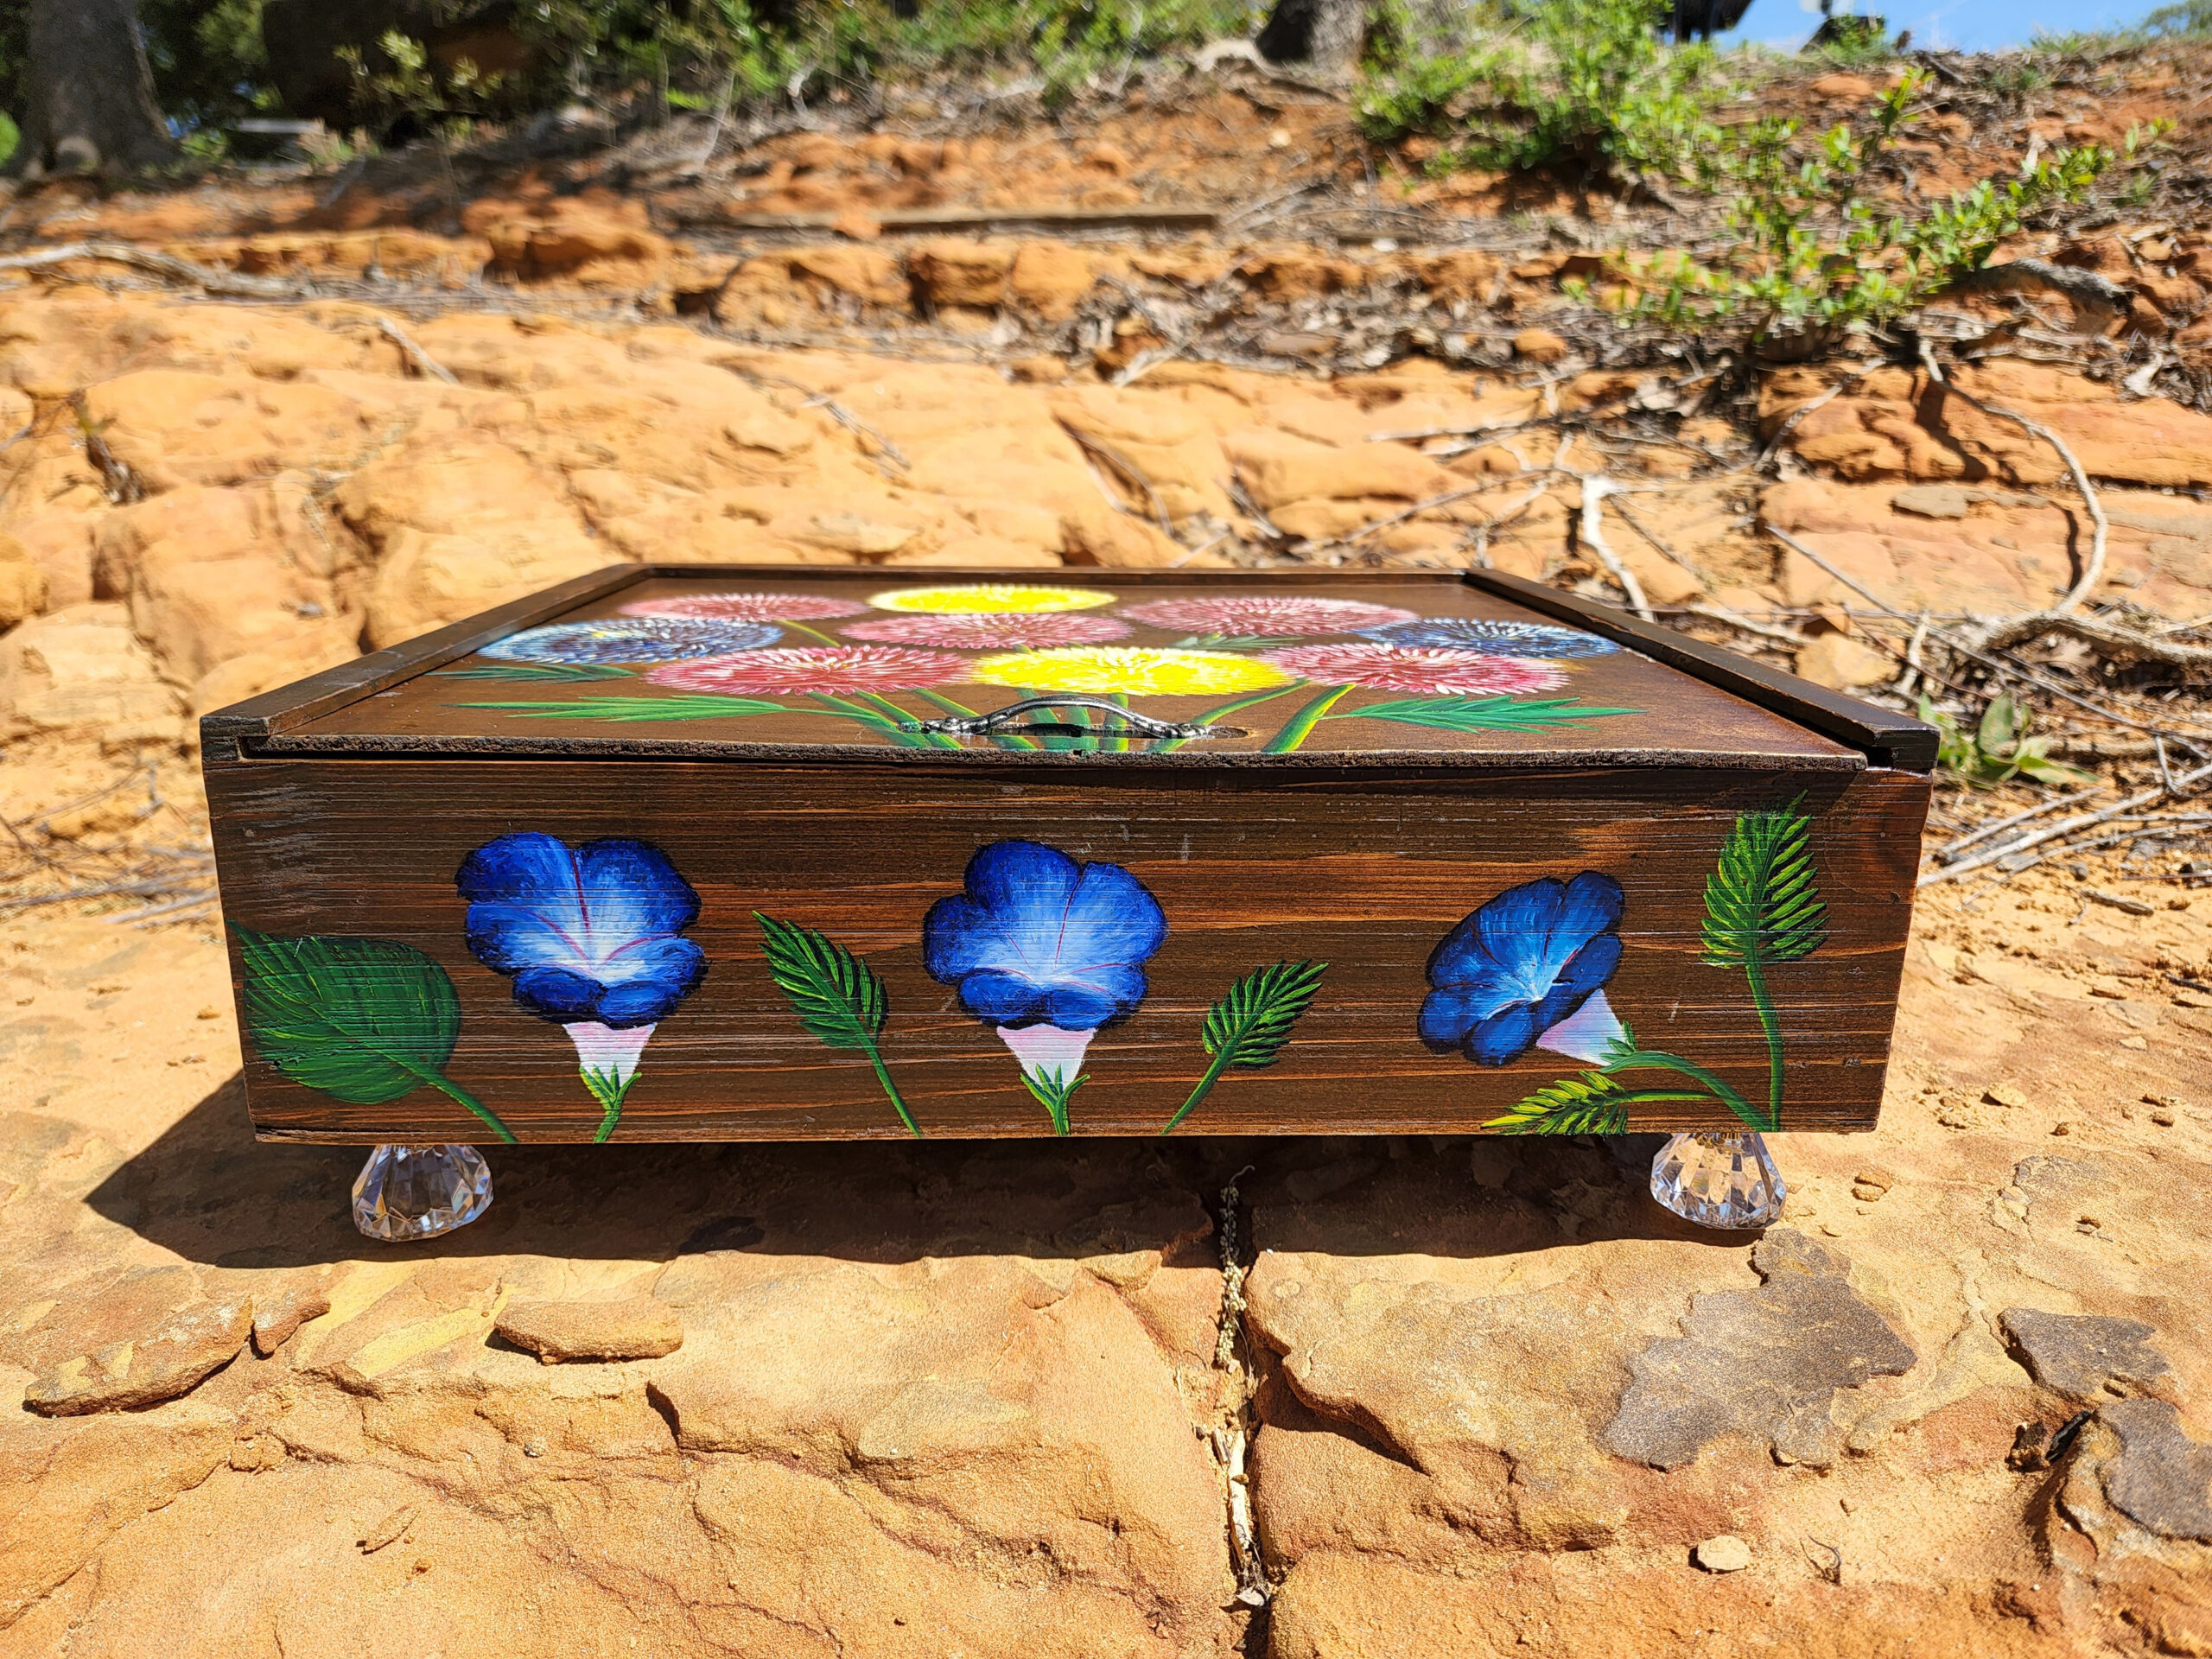 This is one of a kind handpainted wood trinket box with layers of felt inside, crystal feet, a metal handle, a love stencil mirror, and circle cut mirrors. This cute trinket box is an ideal gift for a special loved one. You can store jewelry such as rings, necklaces, bracelets, or anything you would like to keep in a particular place, especially in this elegant and artistic trinket box.